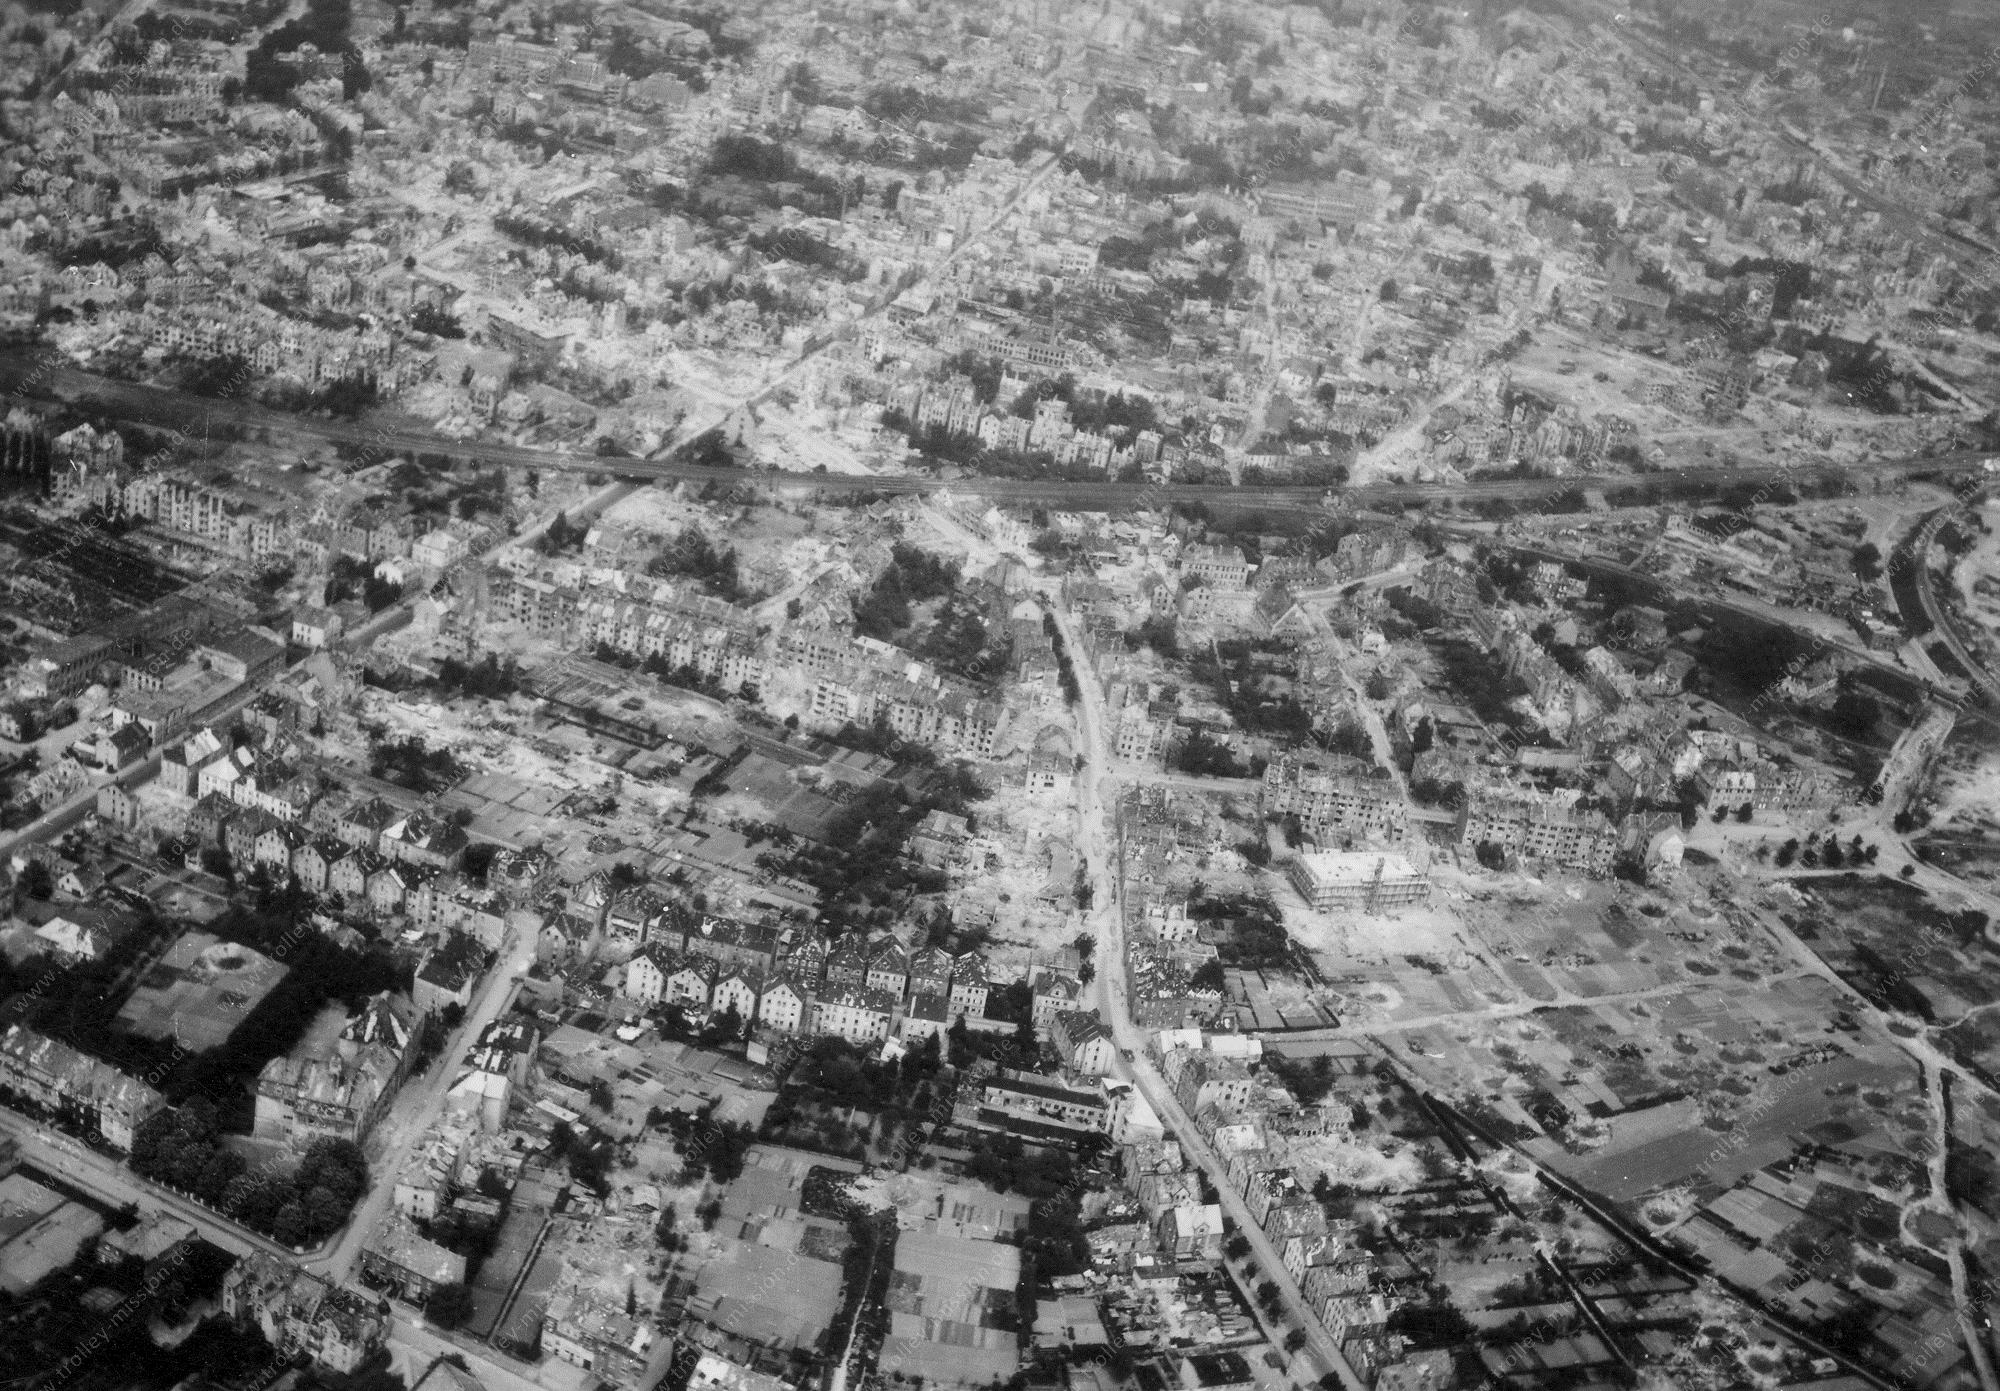 Osnabrueck from above: Aerial view after Allied air raids in World War II